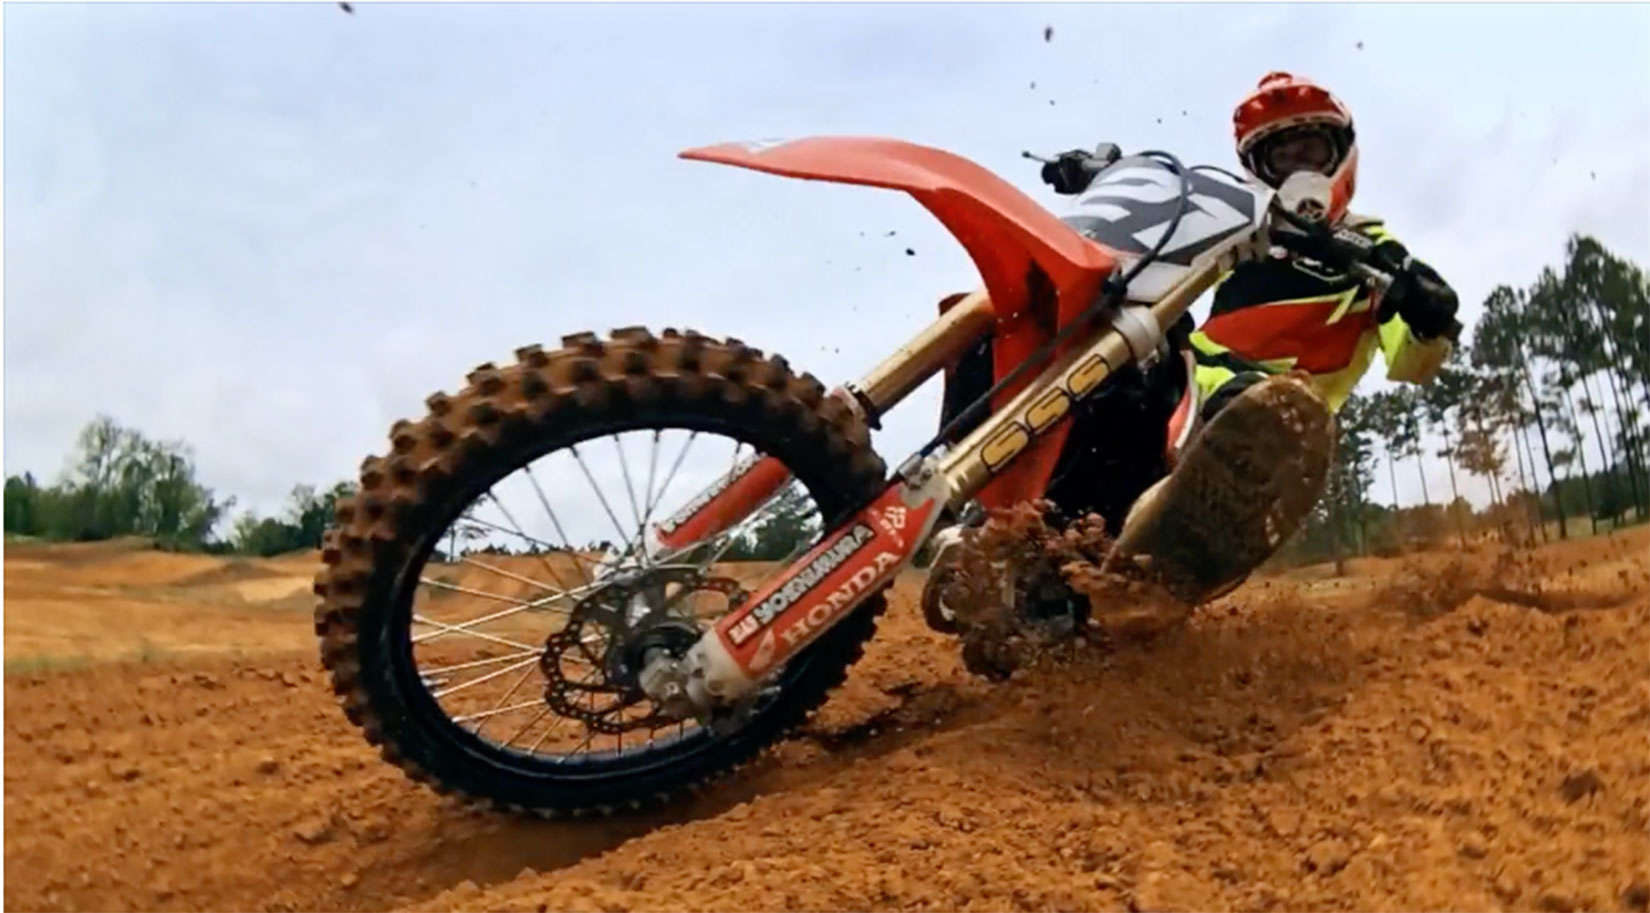 The iPhone in close at dirt level on a motocross track.